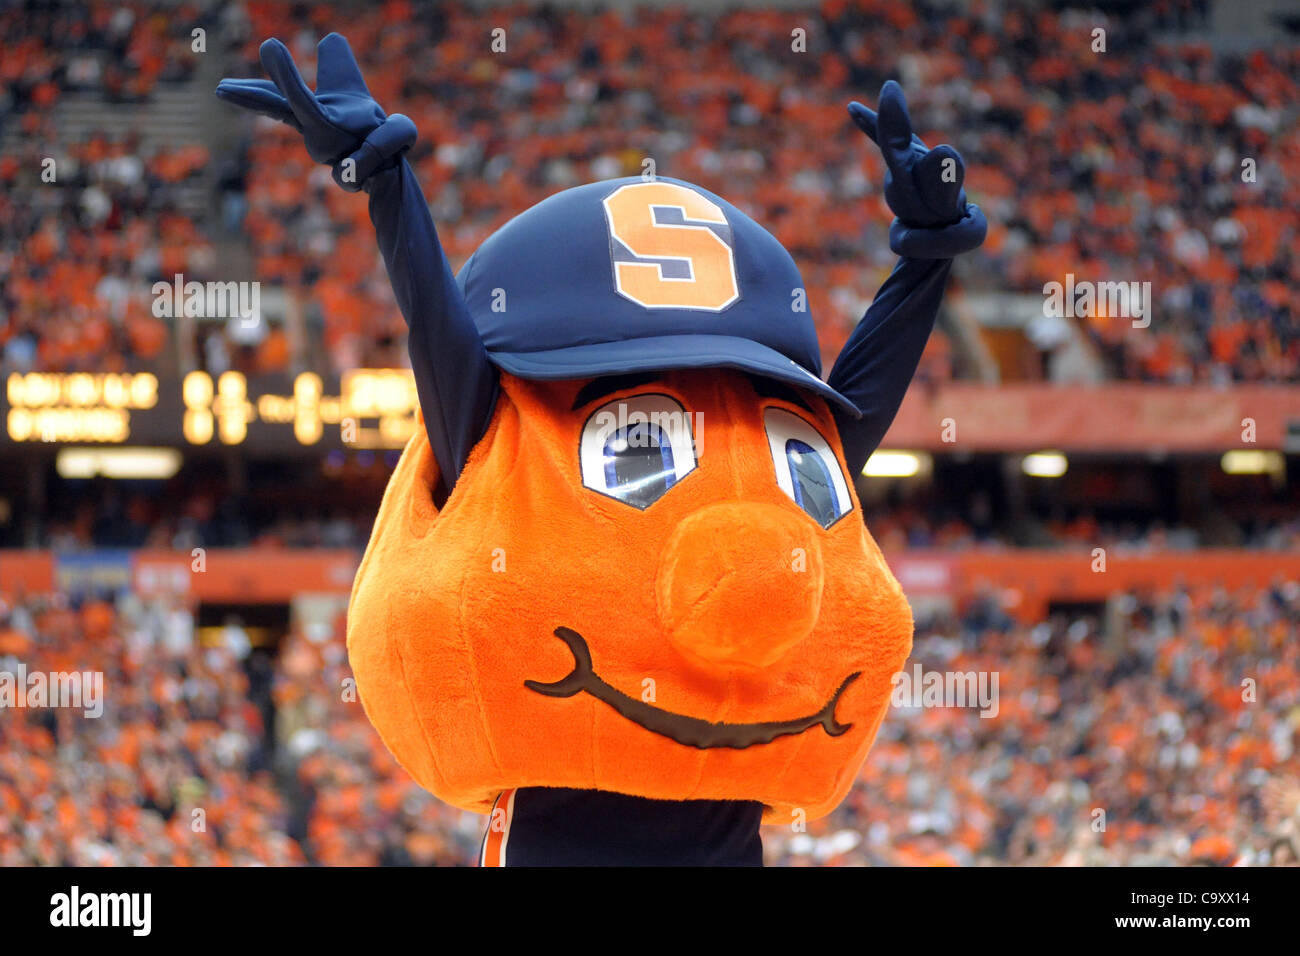 March 3, 2012 - Syracuse, New York, U.S - Syracuse mascot ''Otto'' waves to the crowd before the Orange game against the Louisville Cardinals at the Carrier Dome in Syracuse, NY. Syracuse leads Louisville 26-19 at the half. (Credit Image: © Michael Johnson/Southcreek/ZUMAPRESS.com) Stock Photo